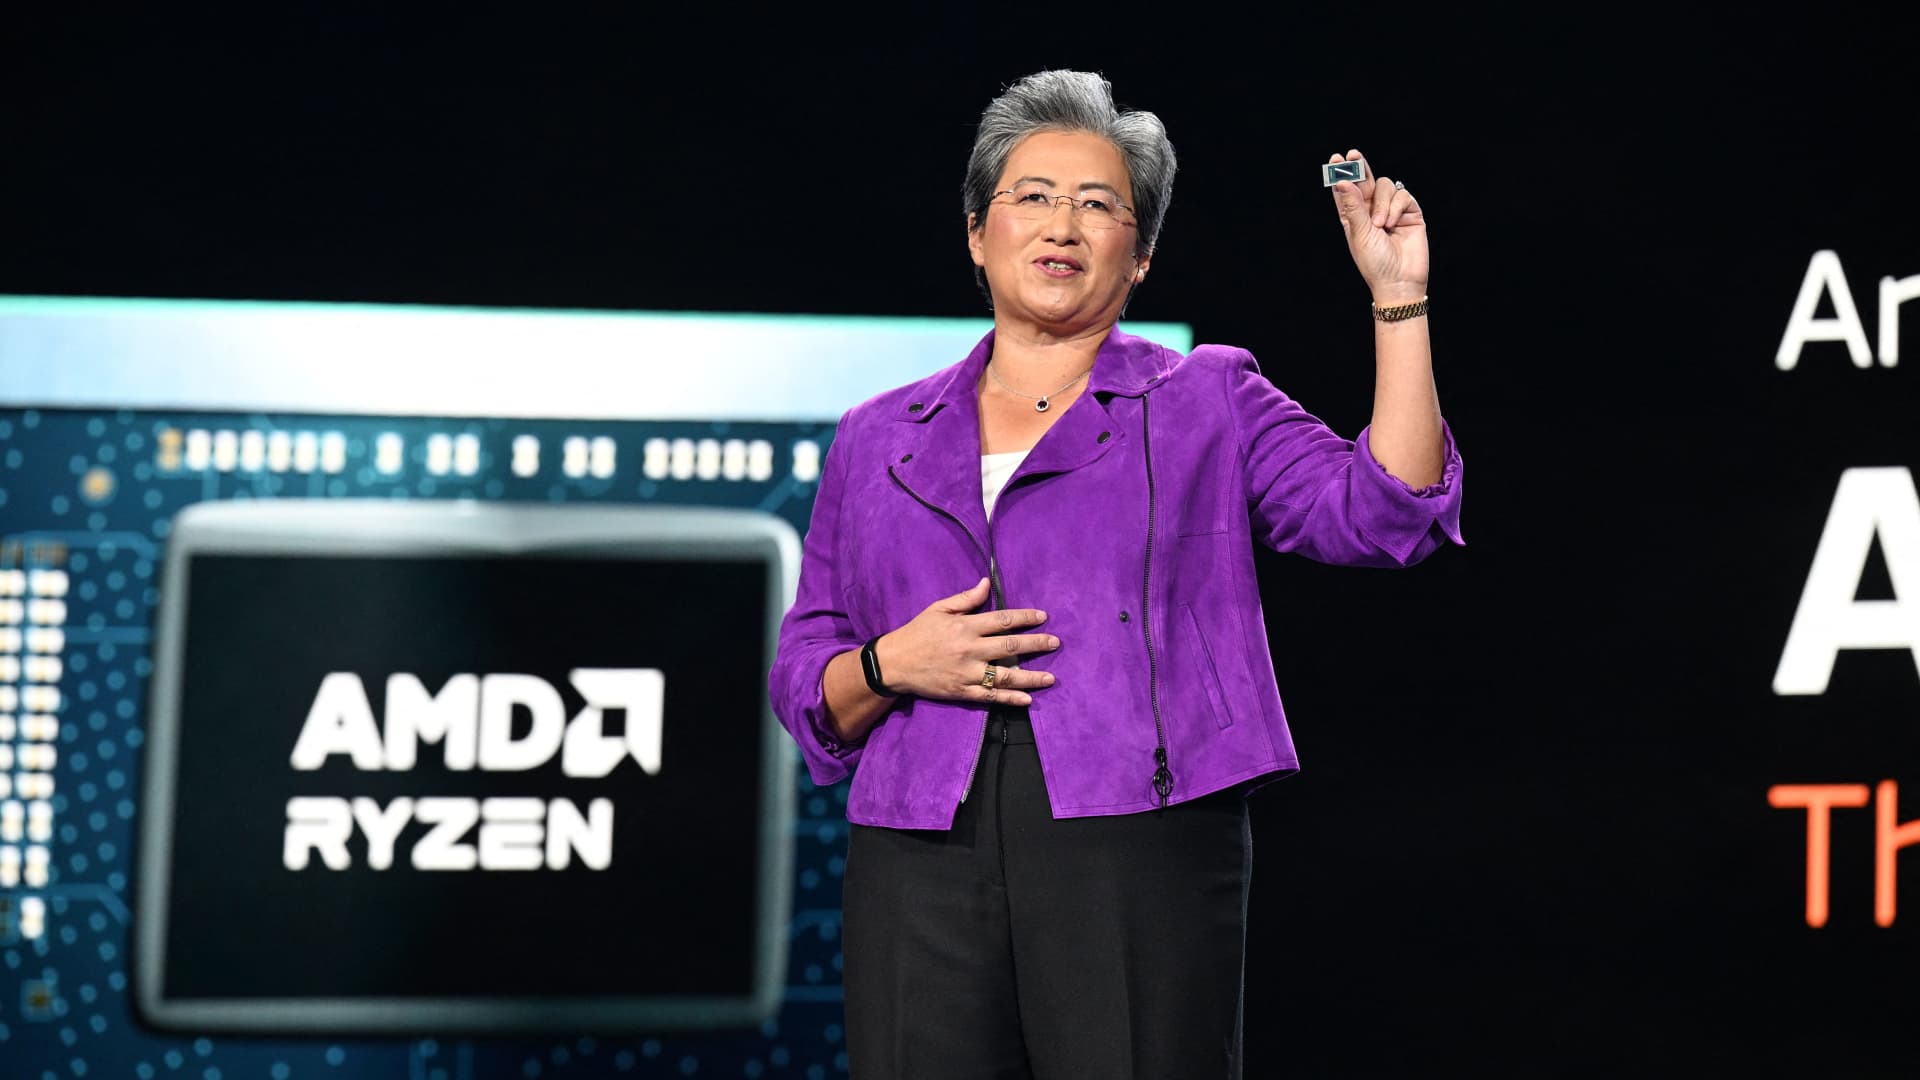 Chip stocks rally on optimistic AMD earnings and Fed's signal that inflation is easing